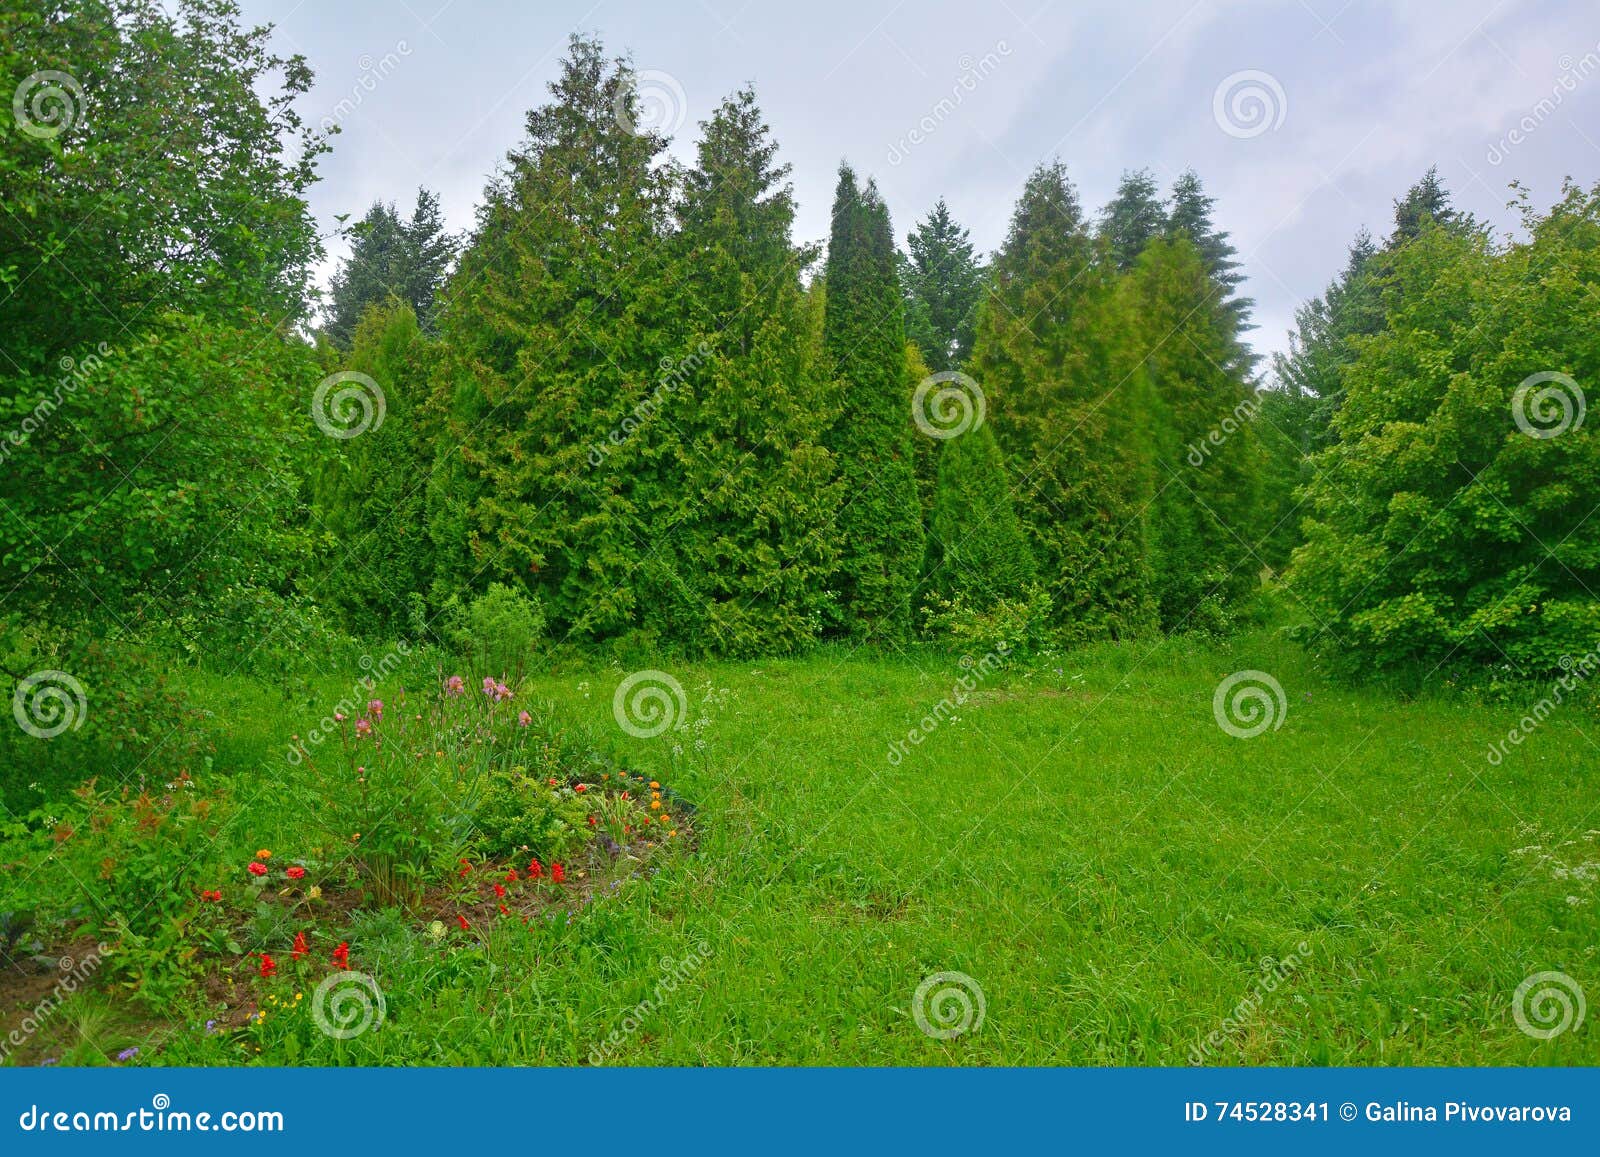 Flowers And Trees In Dendrology Garden In Pereslavl Zalessky City